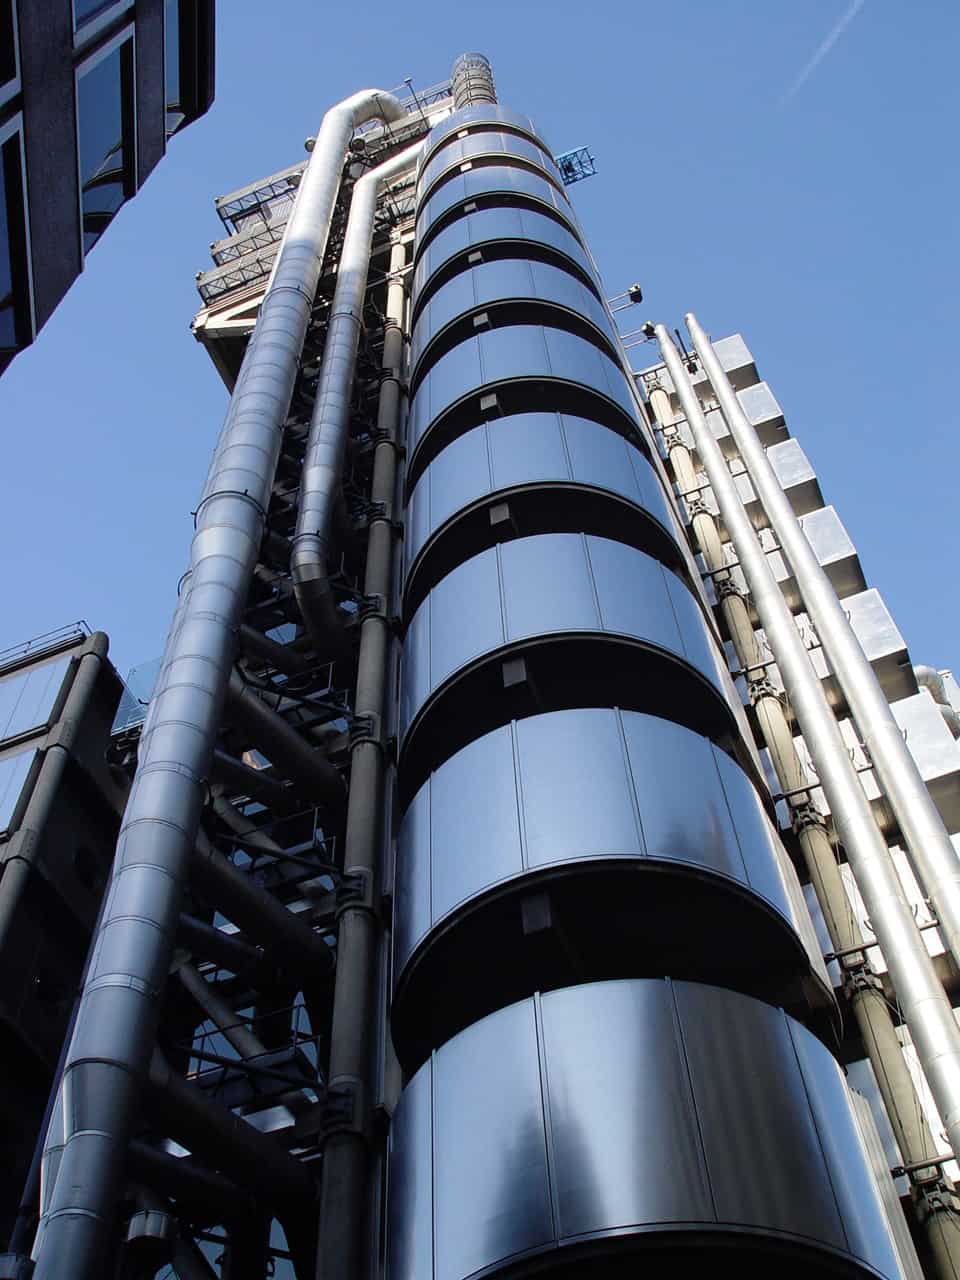 Lloyd's Building in the City of London, England